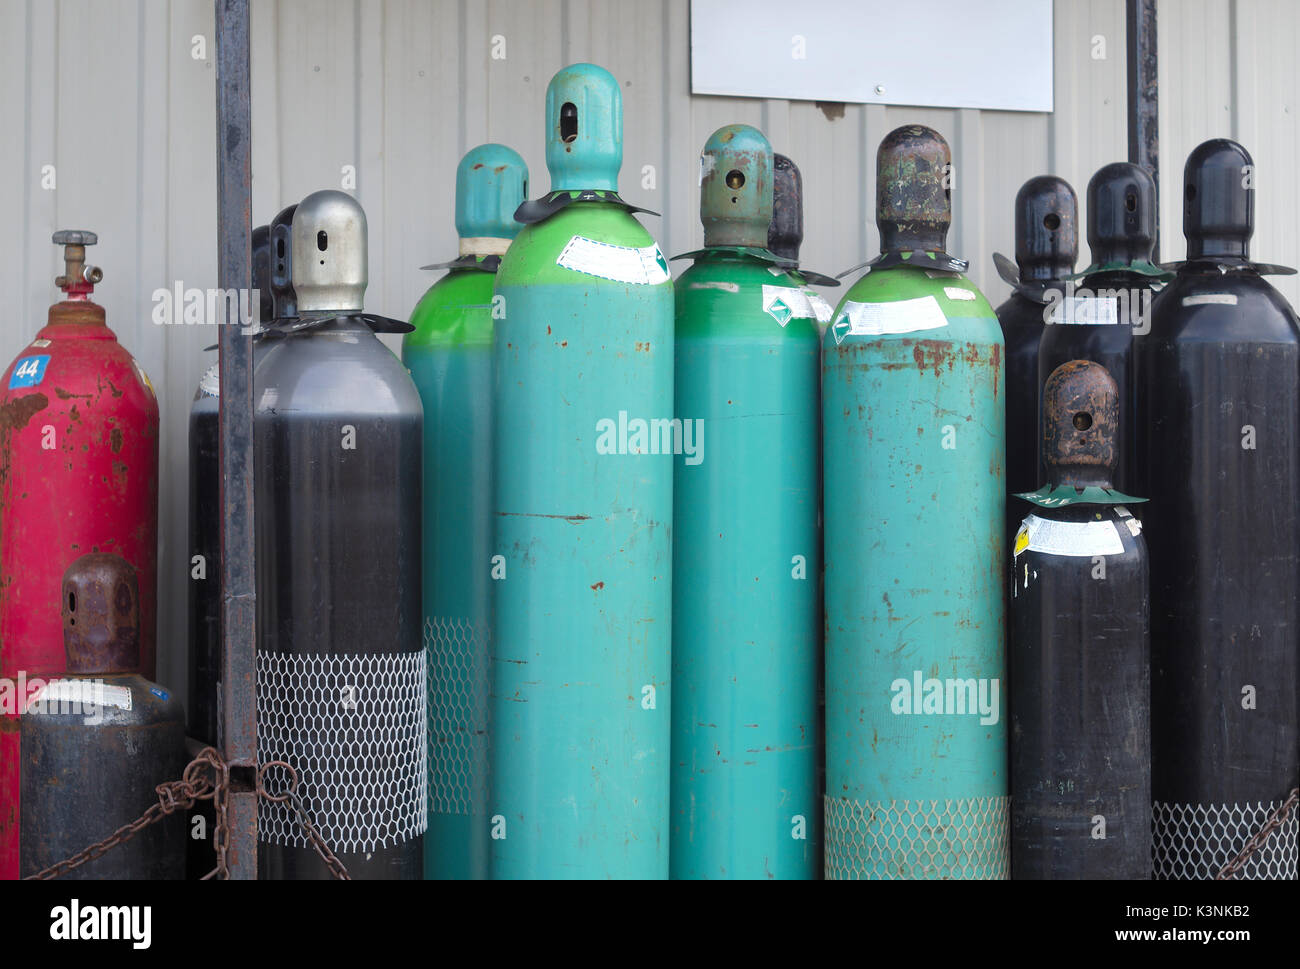 gas tanks chemical products under pressure empty bottles for recycling Stock Photo